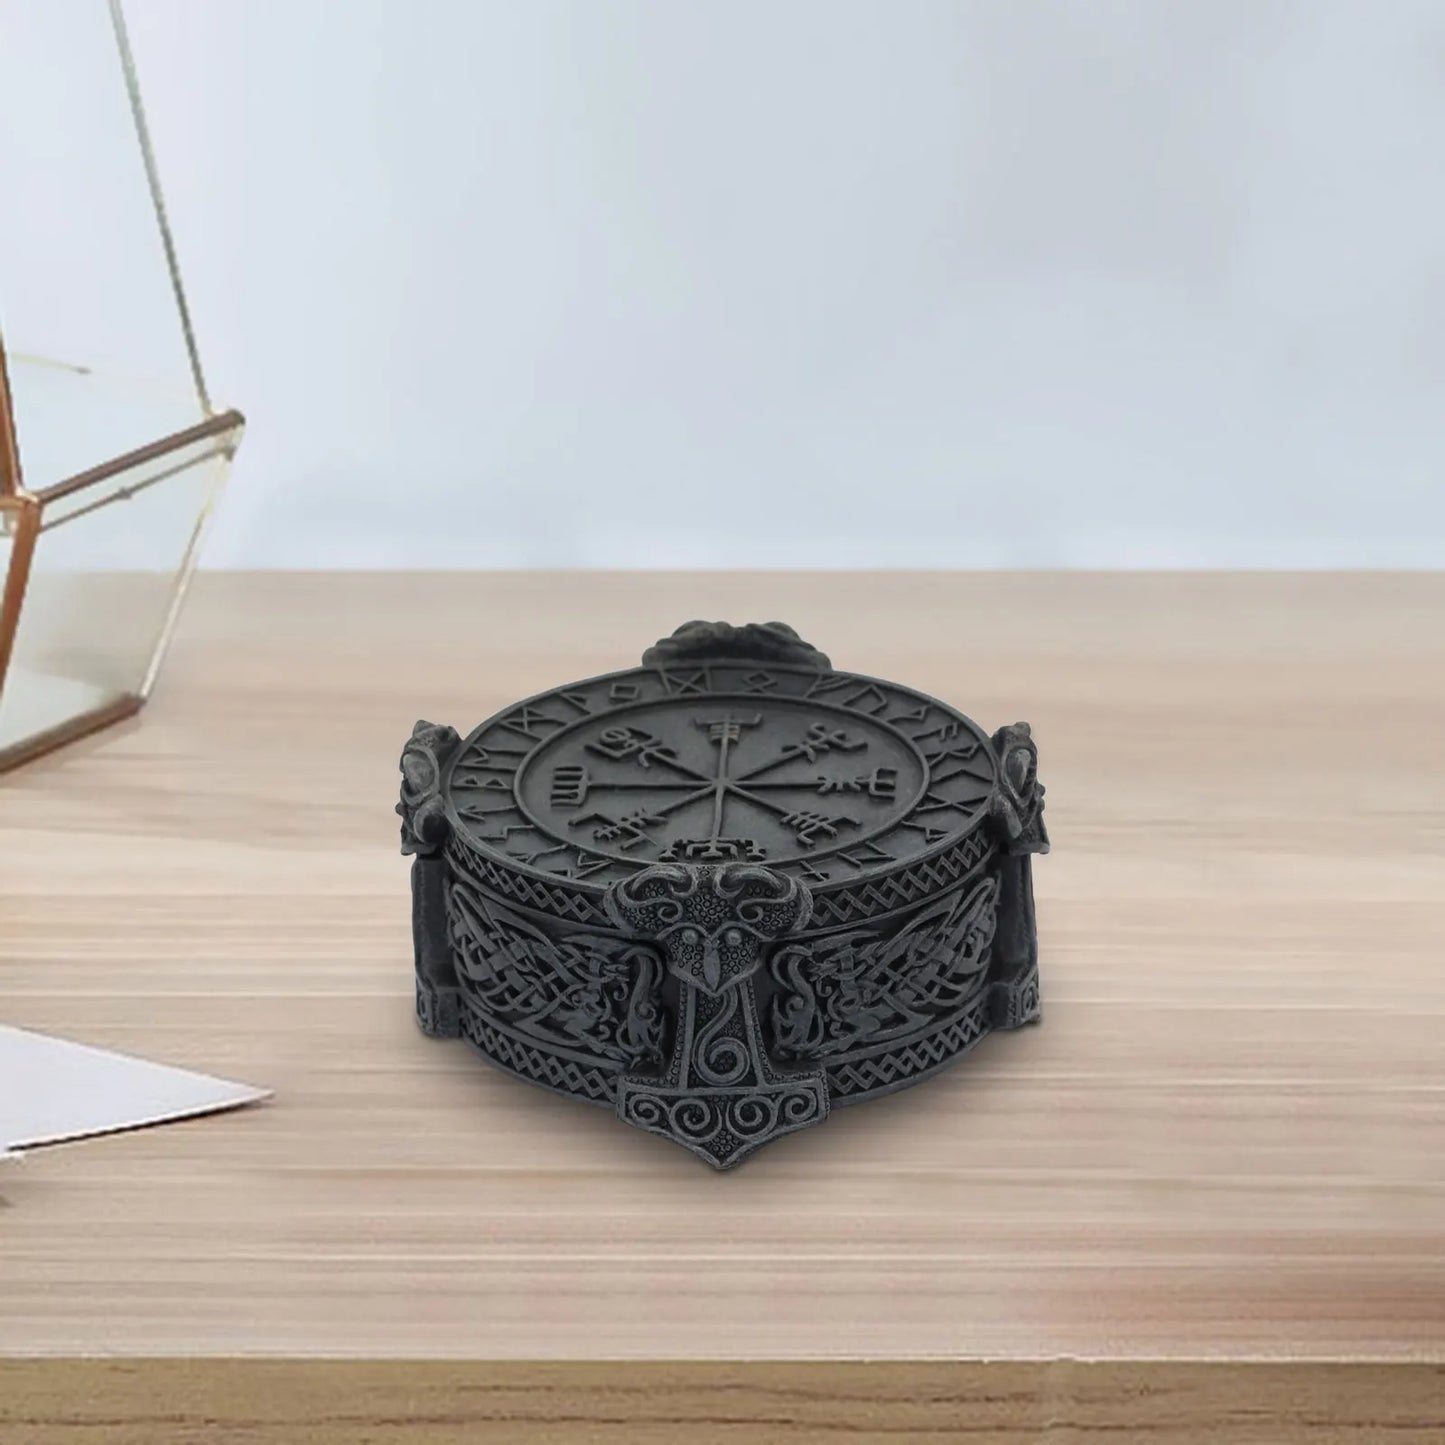 Norse Viking Portable Jewelry Storage Box Knotwork Hammer for Adornment Collectible Figurine Birthday Gift Home Decor Rings